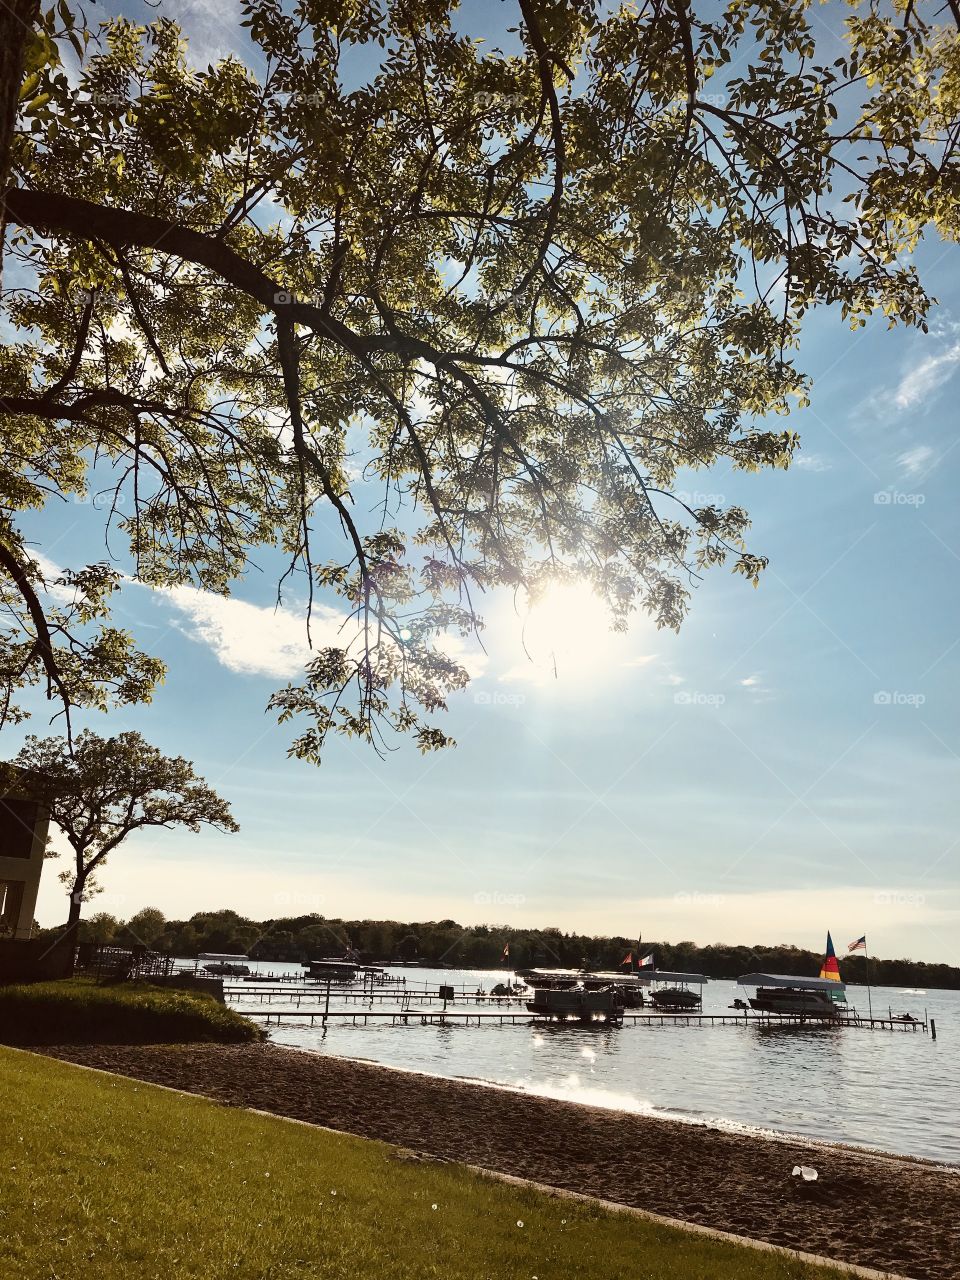 Gorgeous photo of sunny afternoon looking over beautiful lake and dock area full of boats! 